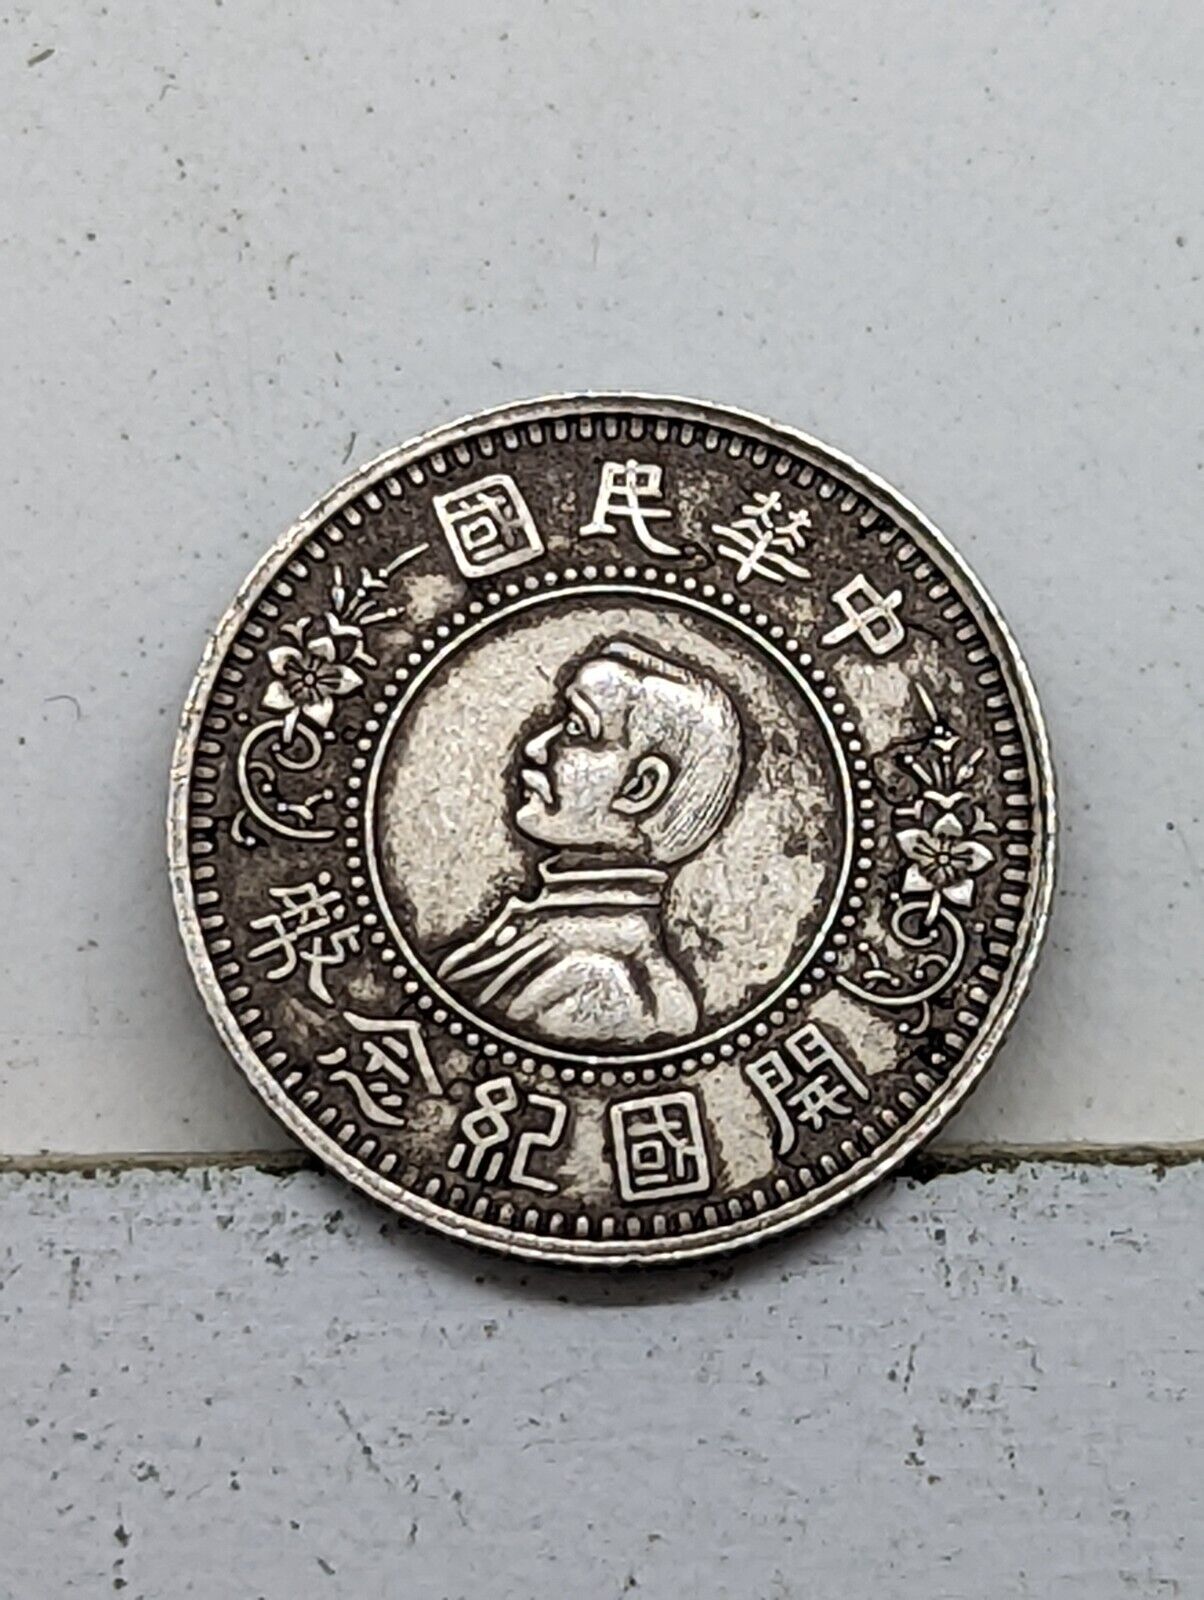 Old Silver 19.36 x 1.15mm (2.62g) Coin Old Chinese Coin Empire Or Republic